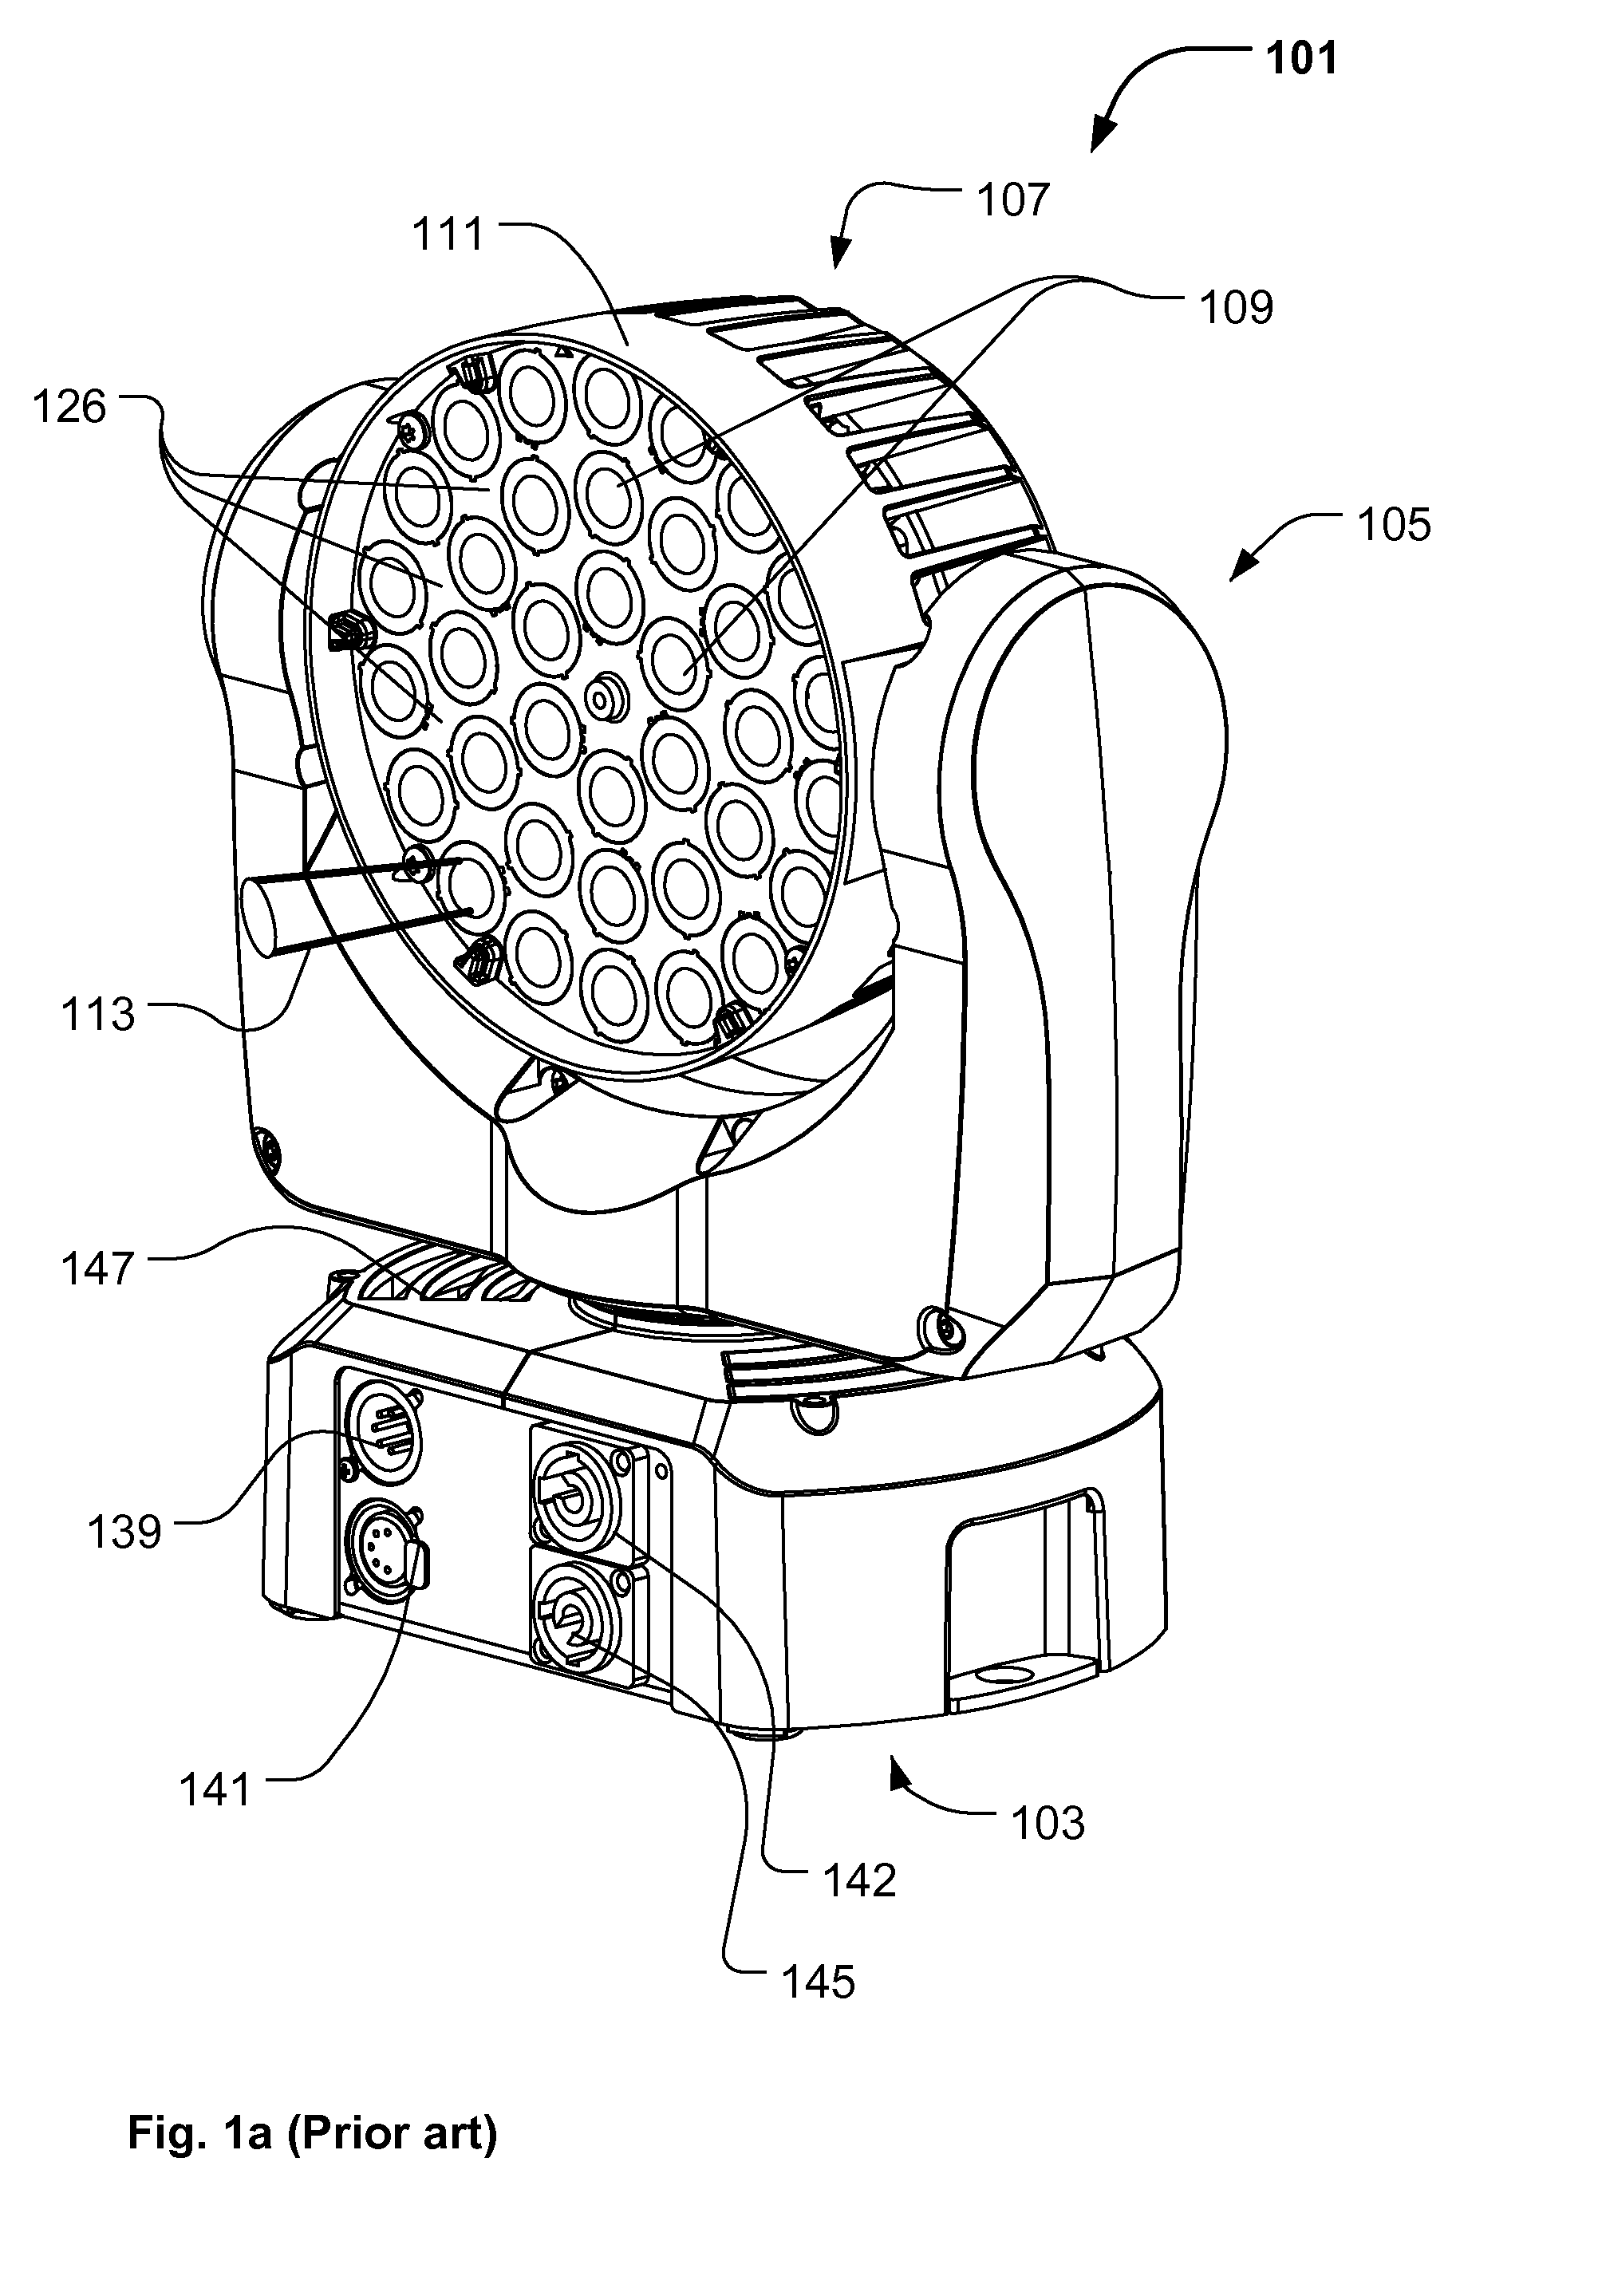 Light Fixture With Background Display Using Diffuse Pixels Between Nondiffuse Light Sources